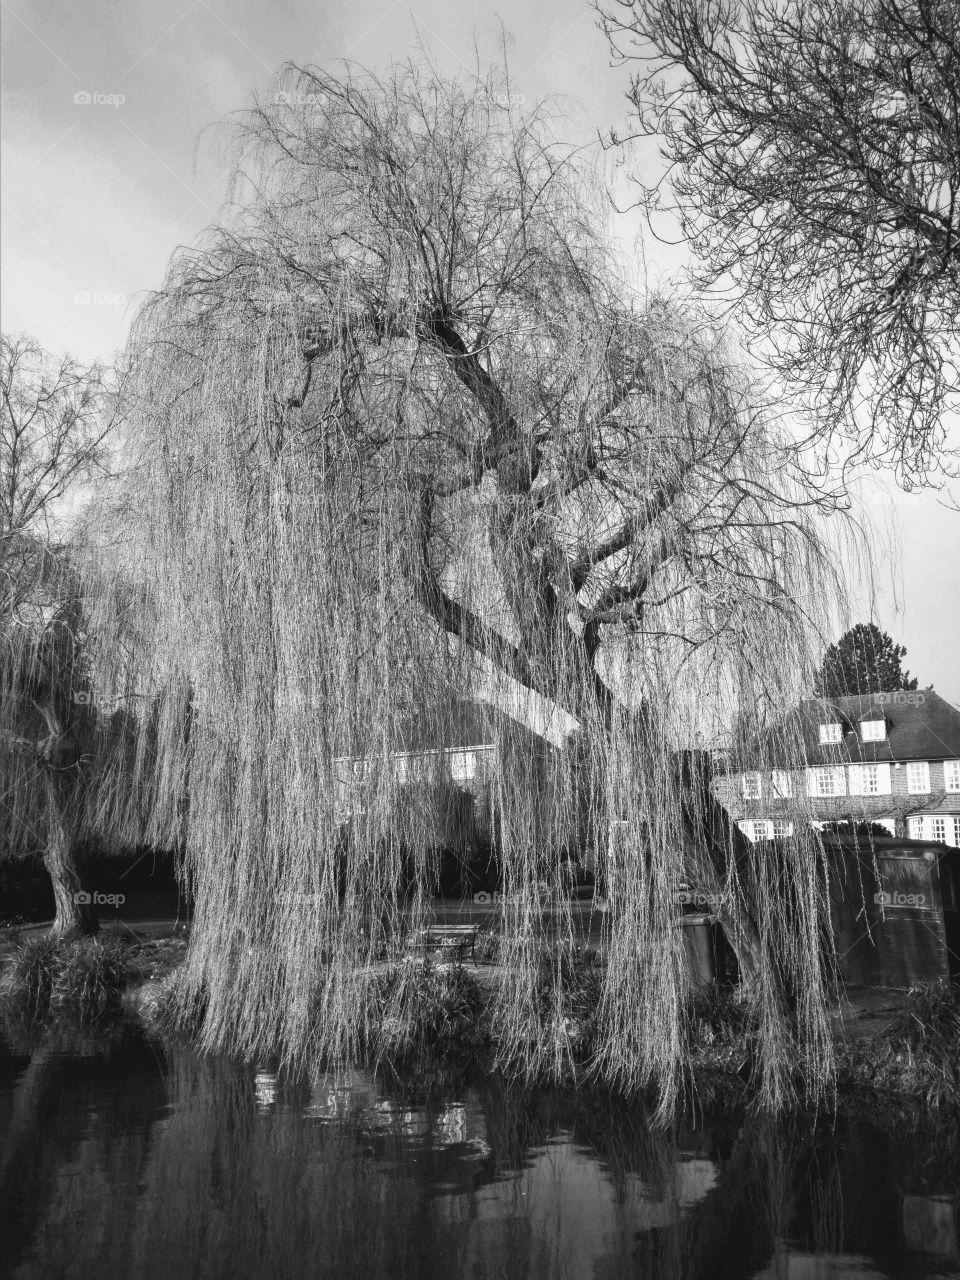 Black and White Sketch The Weeping Willow